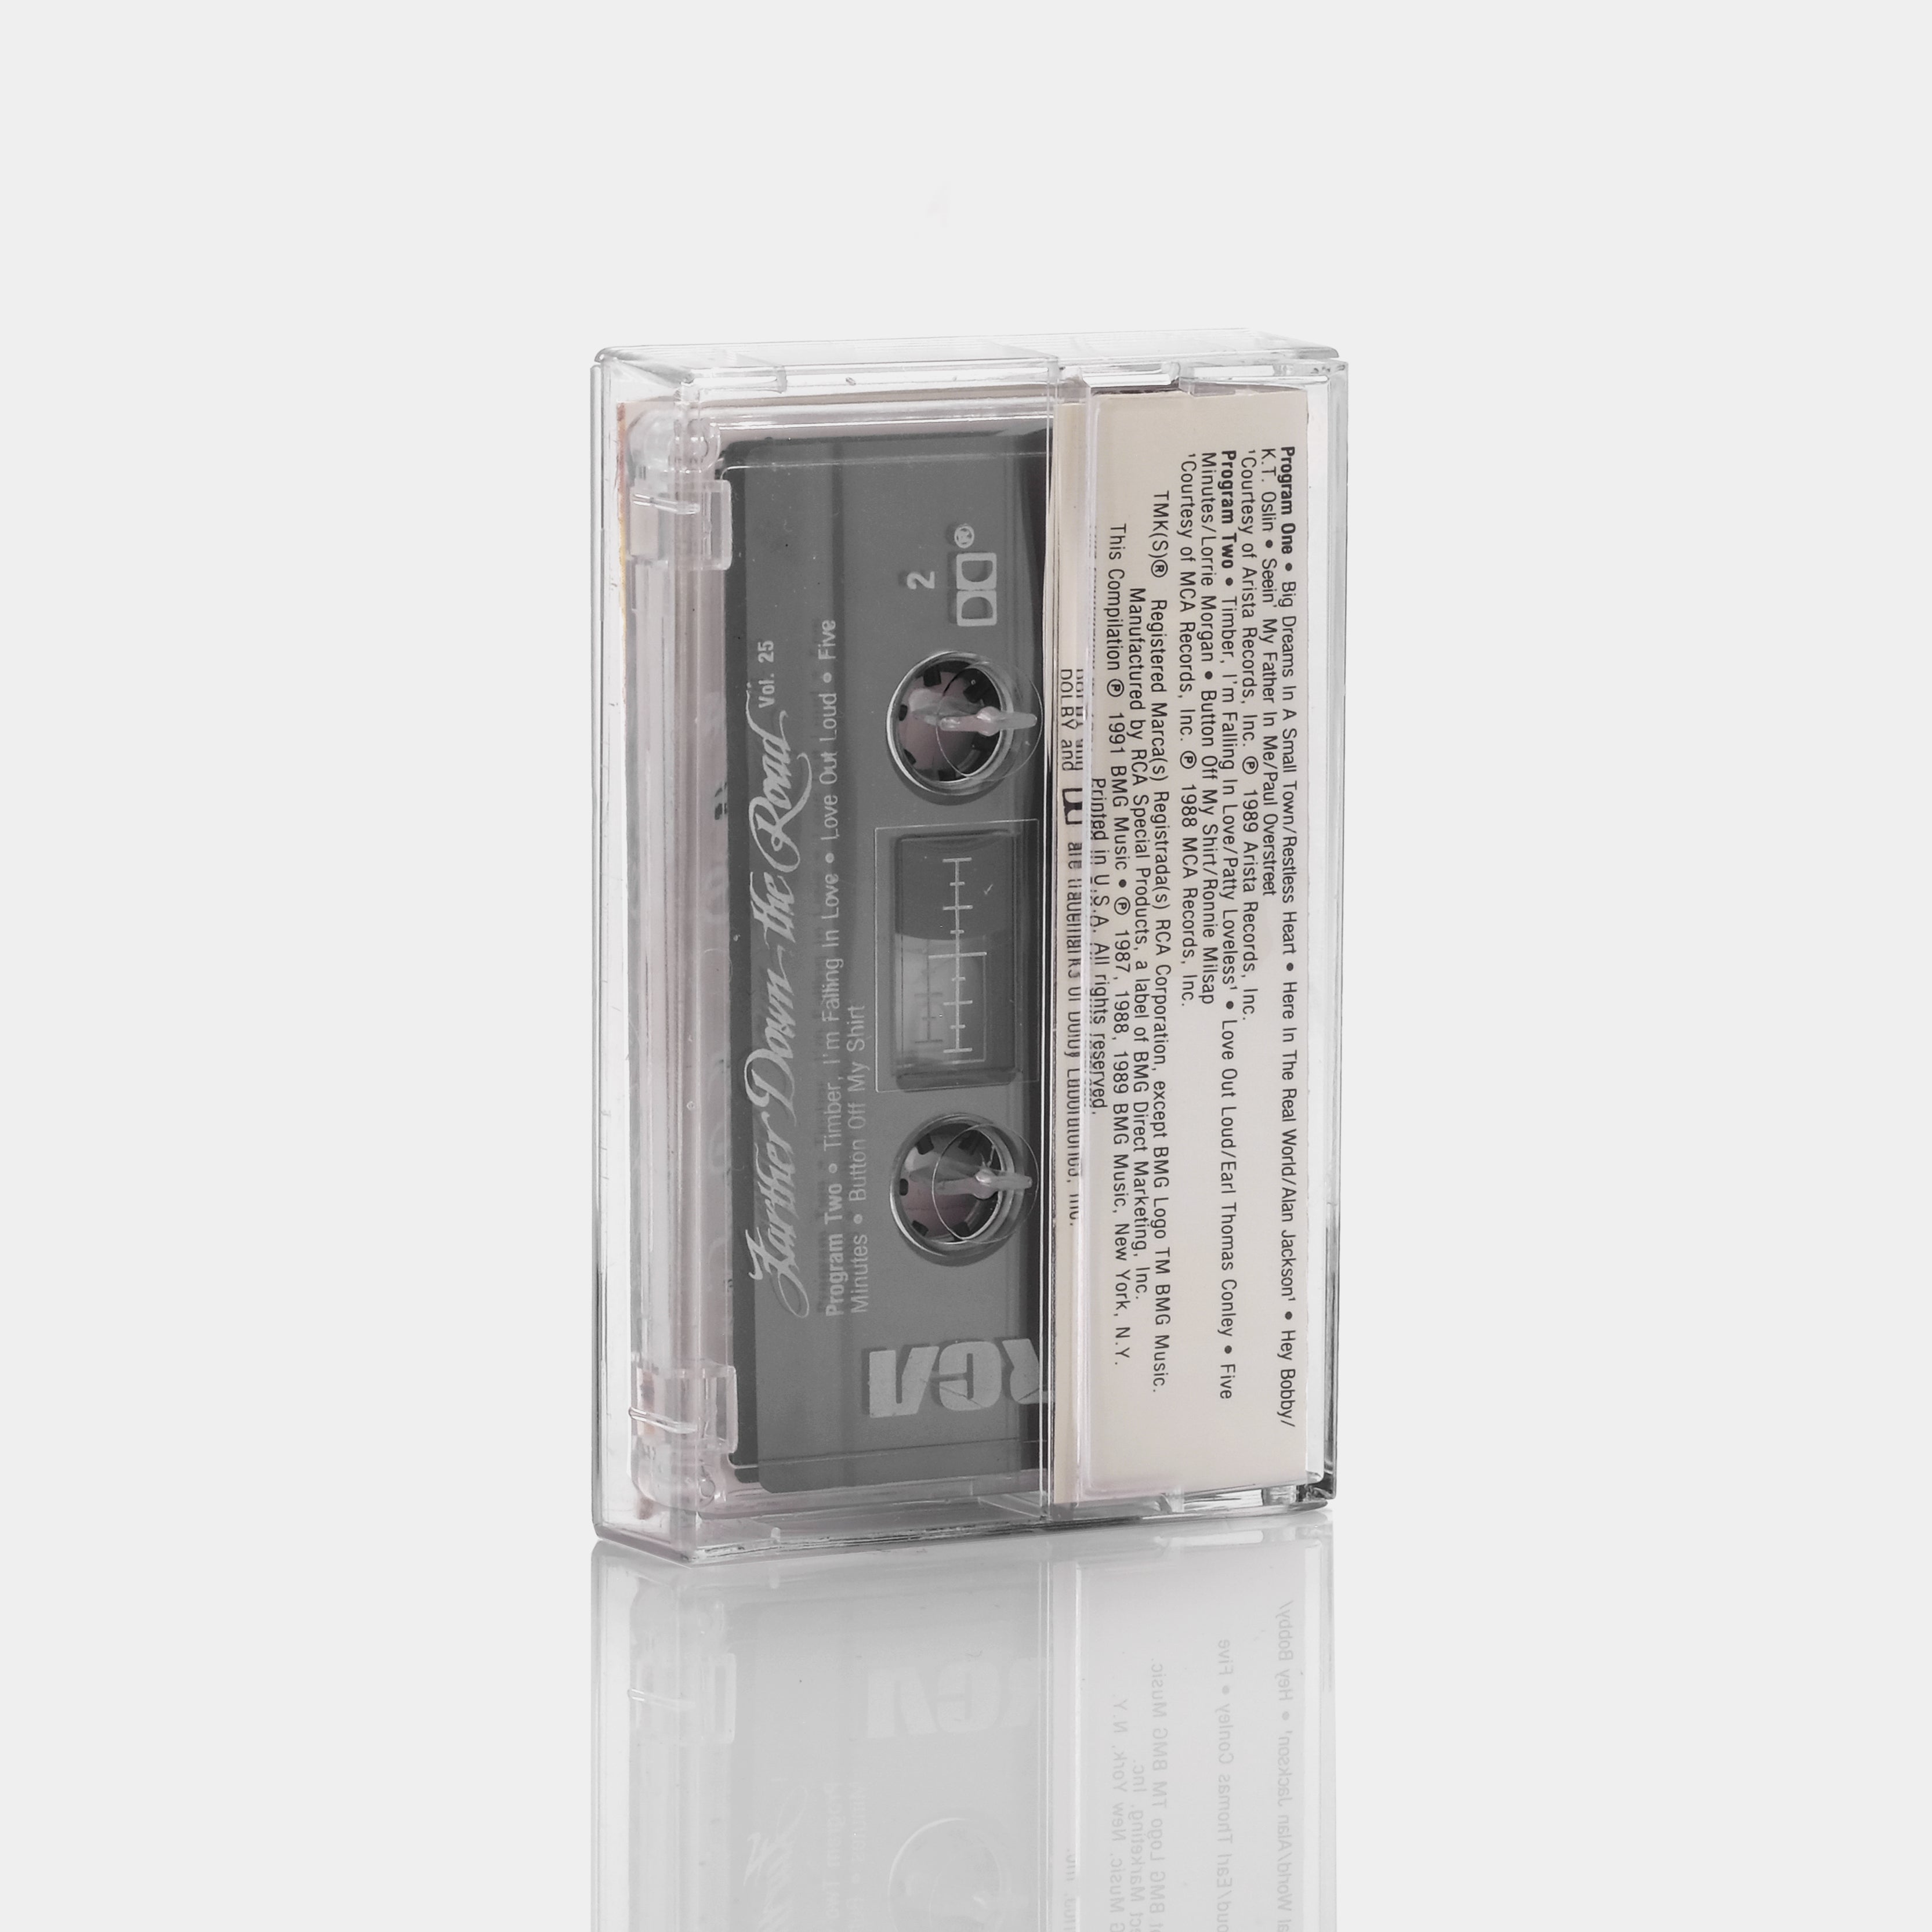 Farther Down The Road (Vol. 25) Cassette Tape